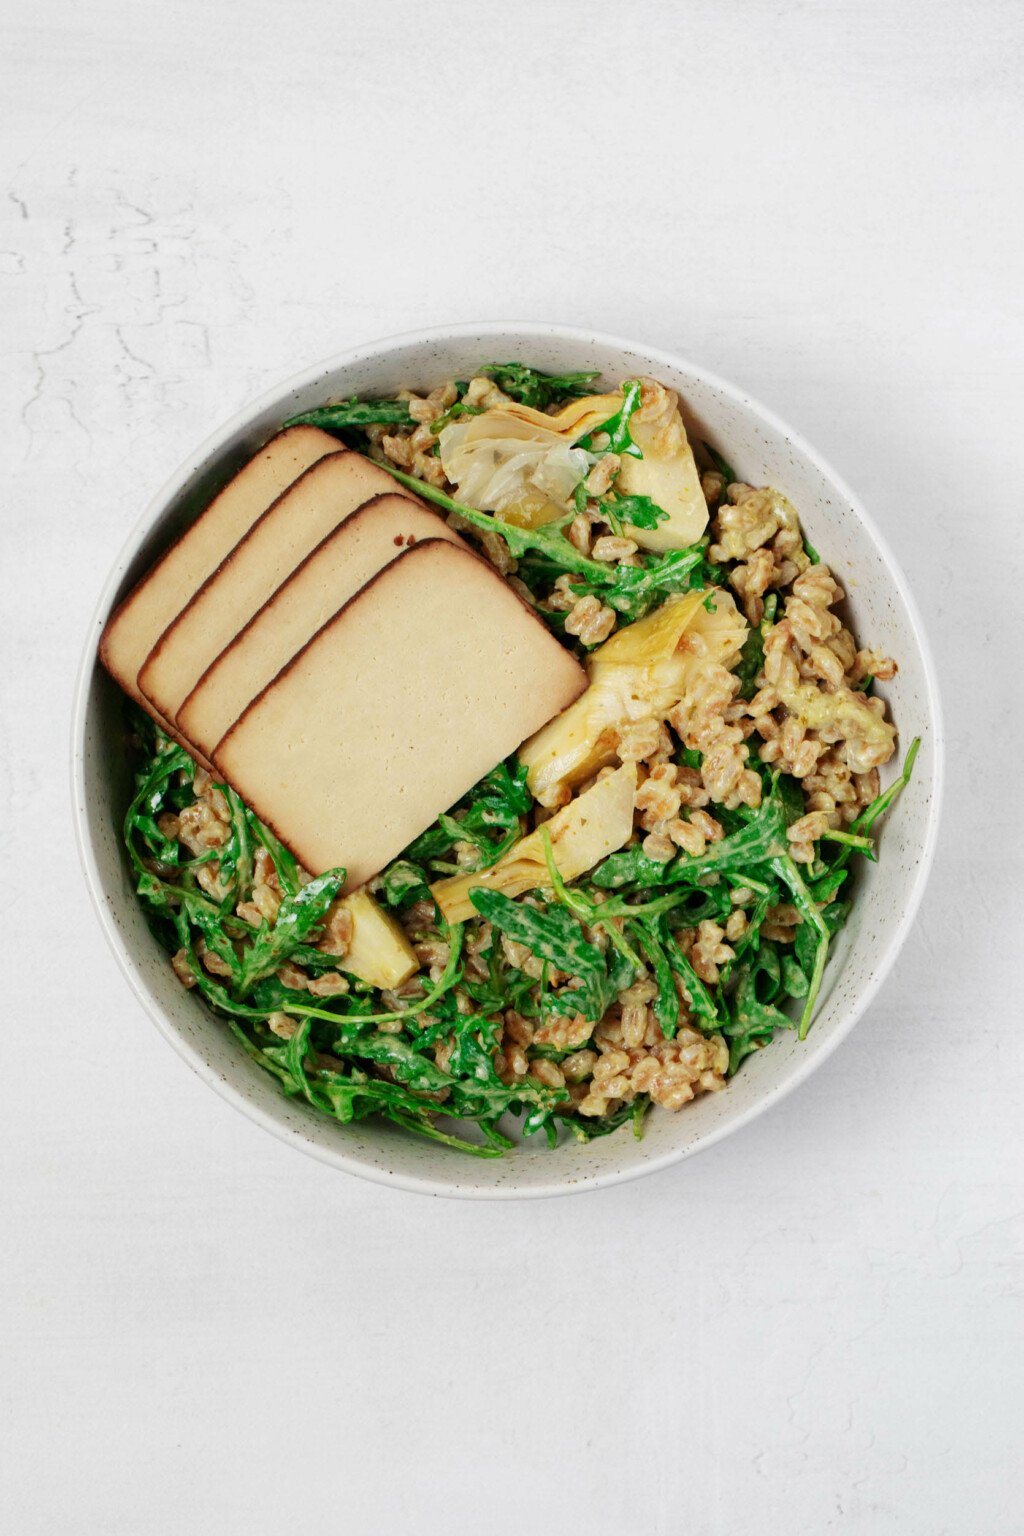 A round, white bowl is filled with whole grains, greens, and slabs of seasoned tofu.